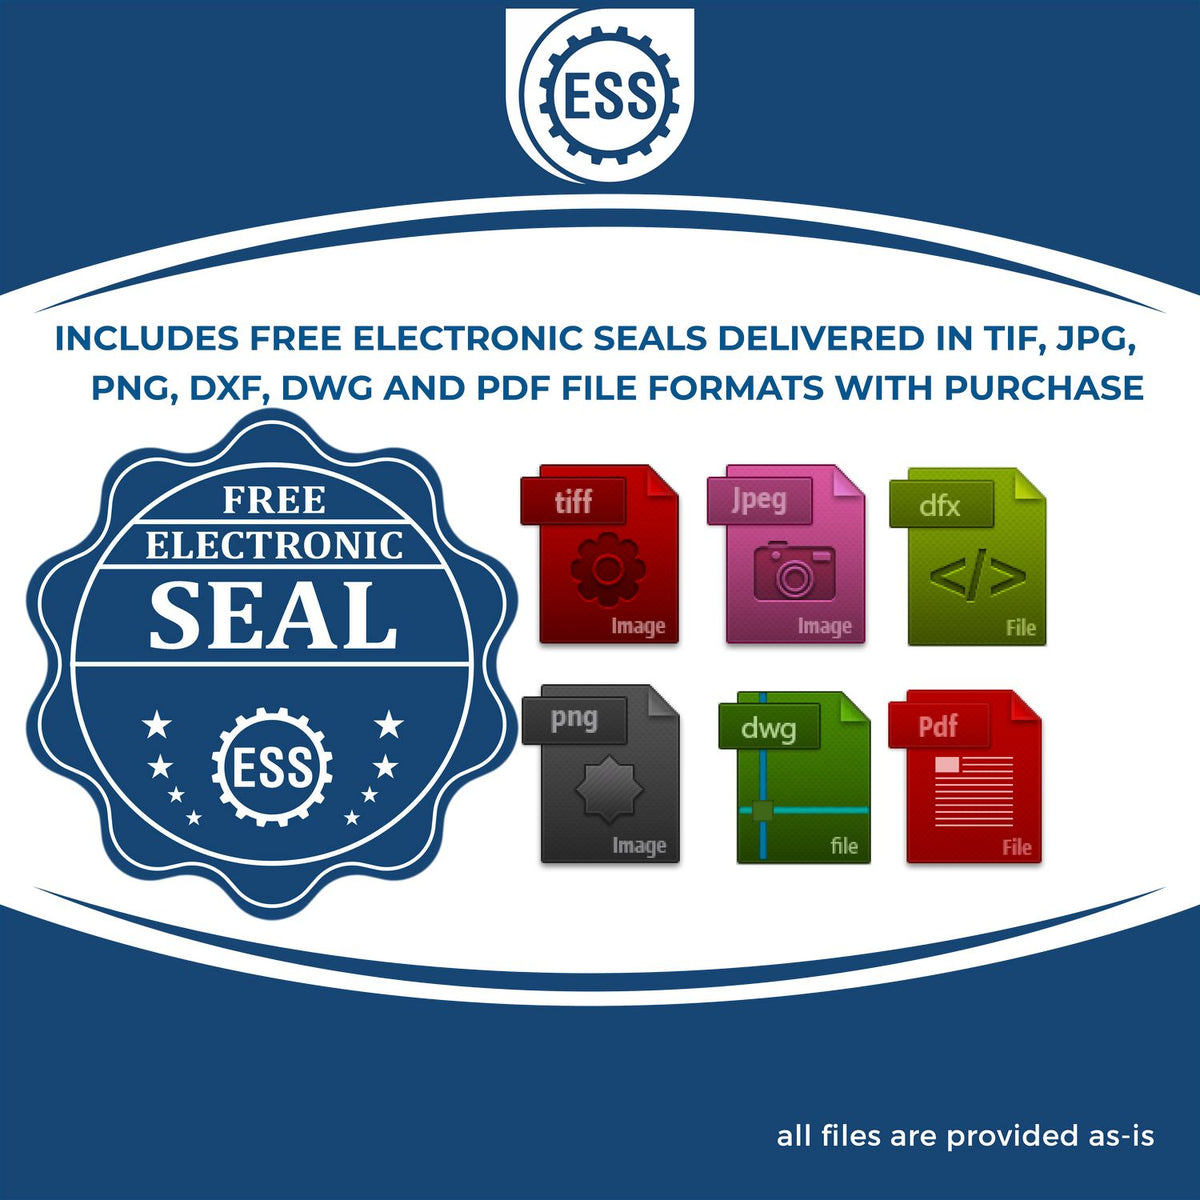 An infographic for the free electronic seal for the Heavy Duty Cast Iron Maryland Architect Embosser illustrating the different file type icons such as DXF, DWG, TIF, JPG and PNG.